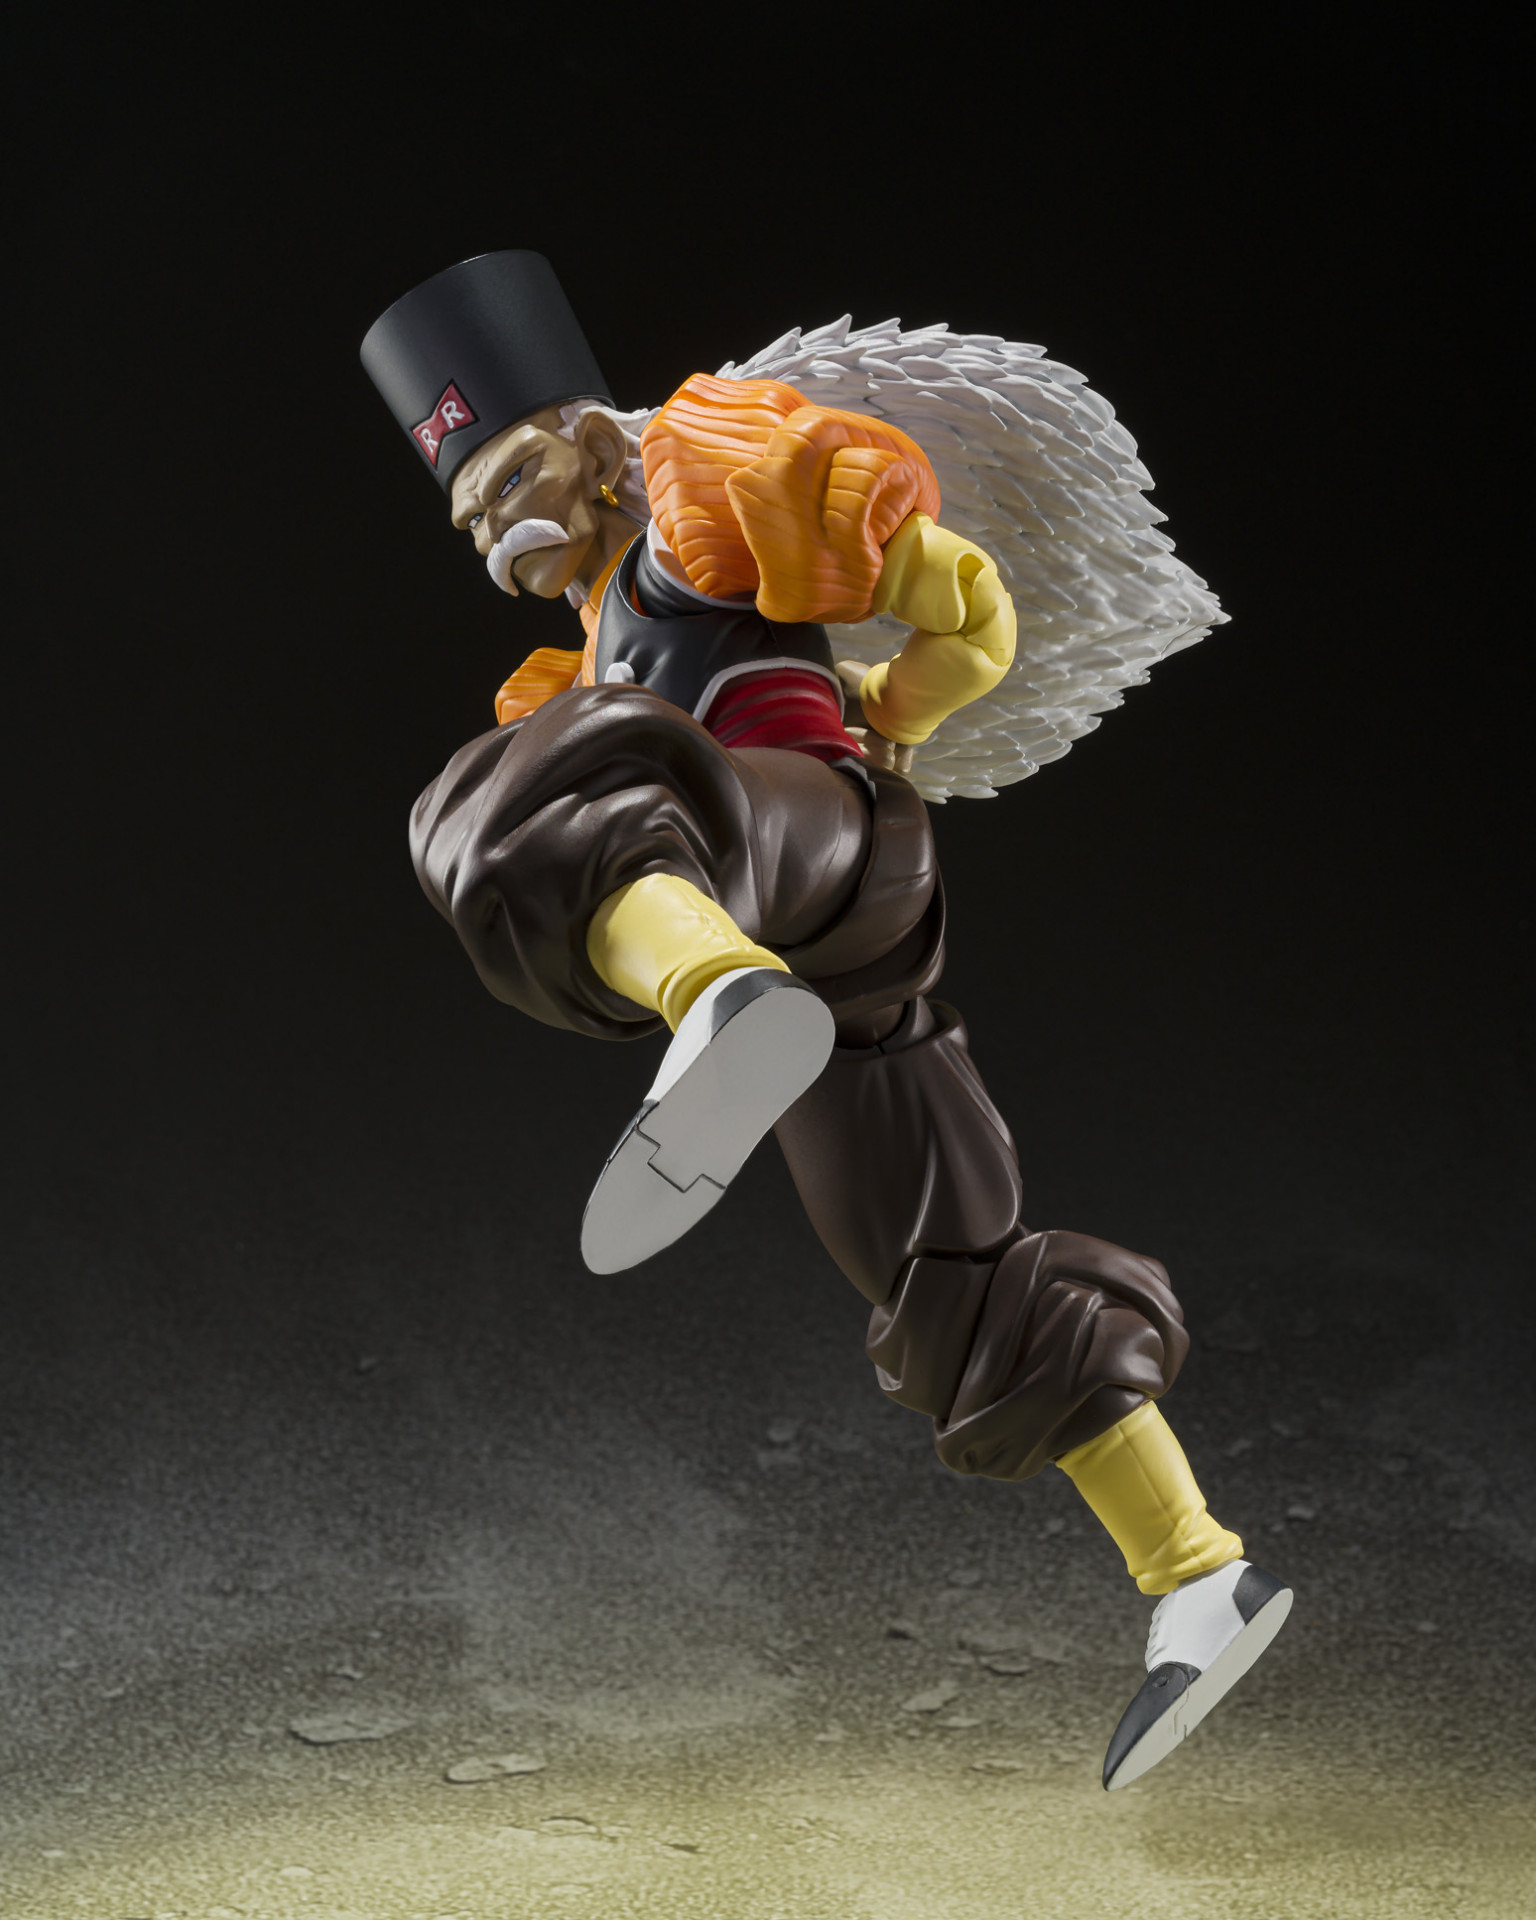 Android 20 Is Coming to S.H.Figuarts!] | DRAGON BALL OFFICIAL SITE